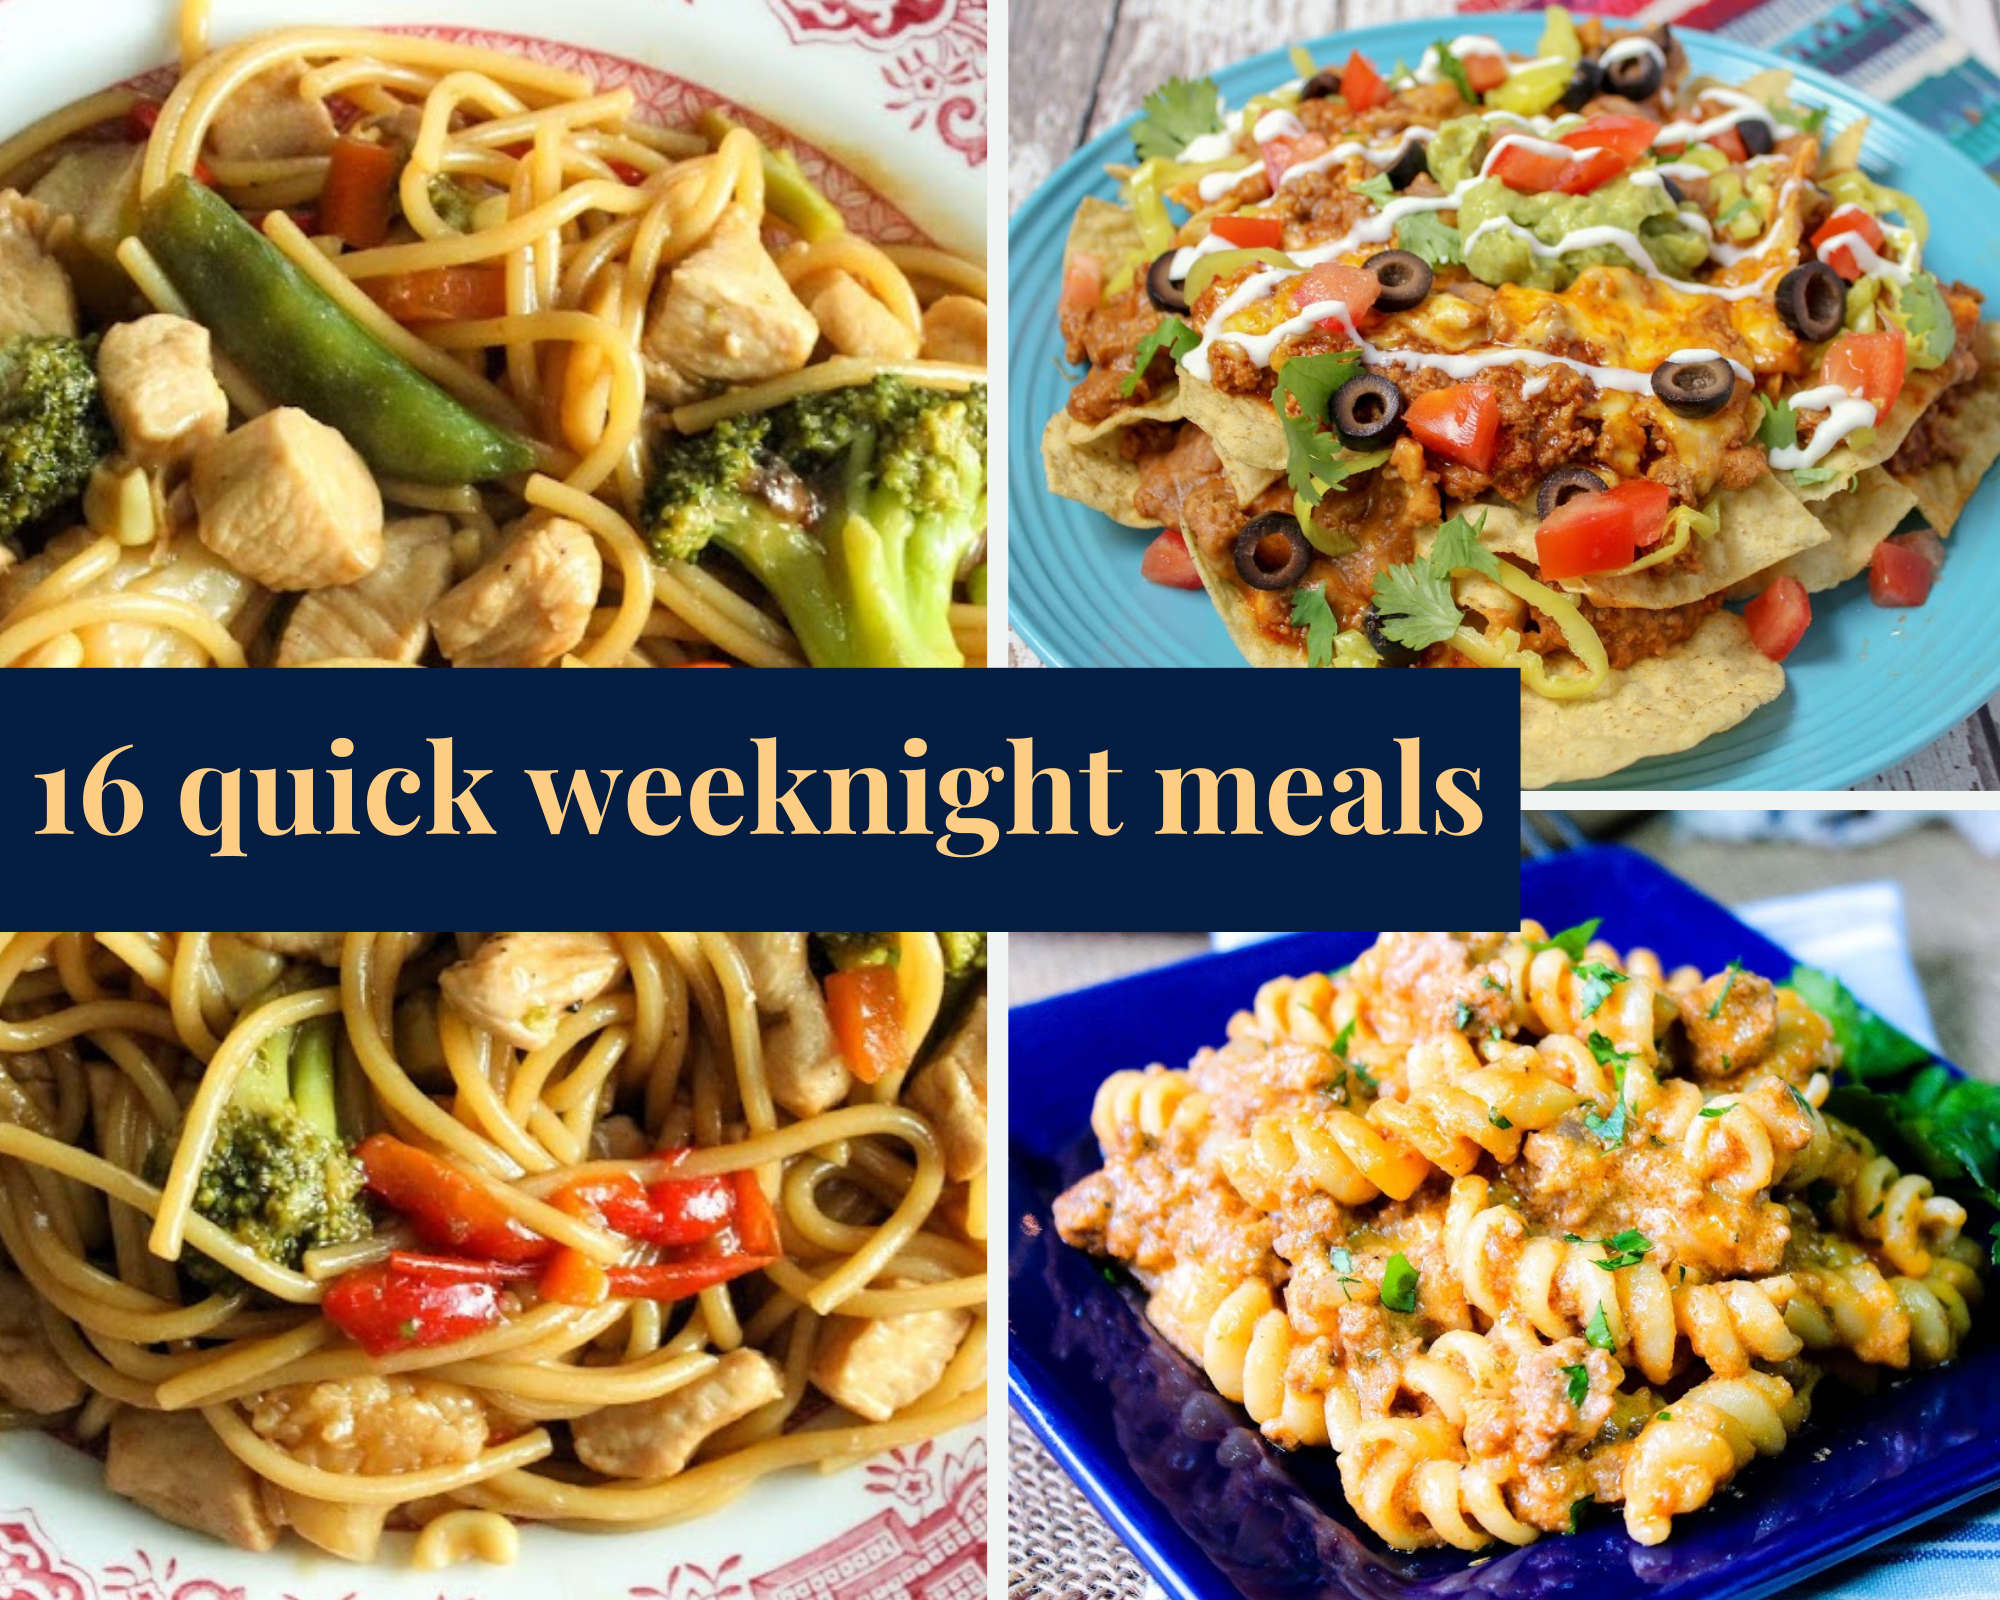 16 quick weeknight meals